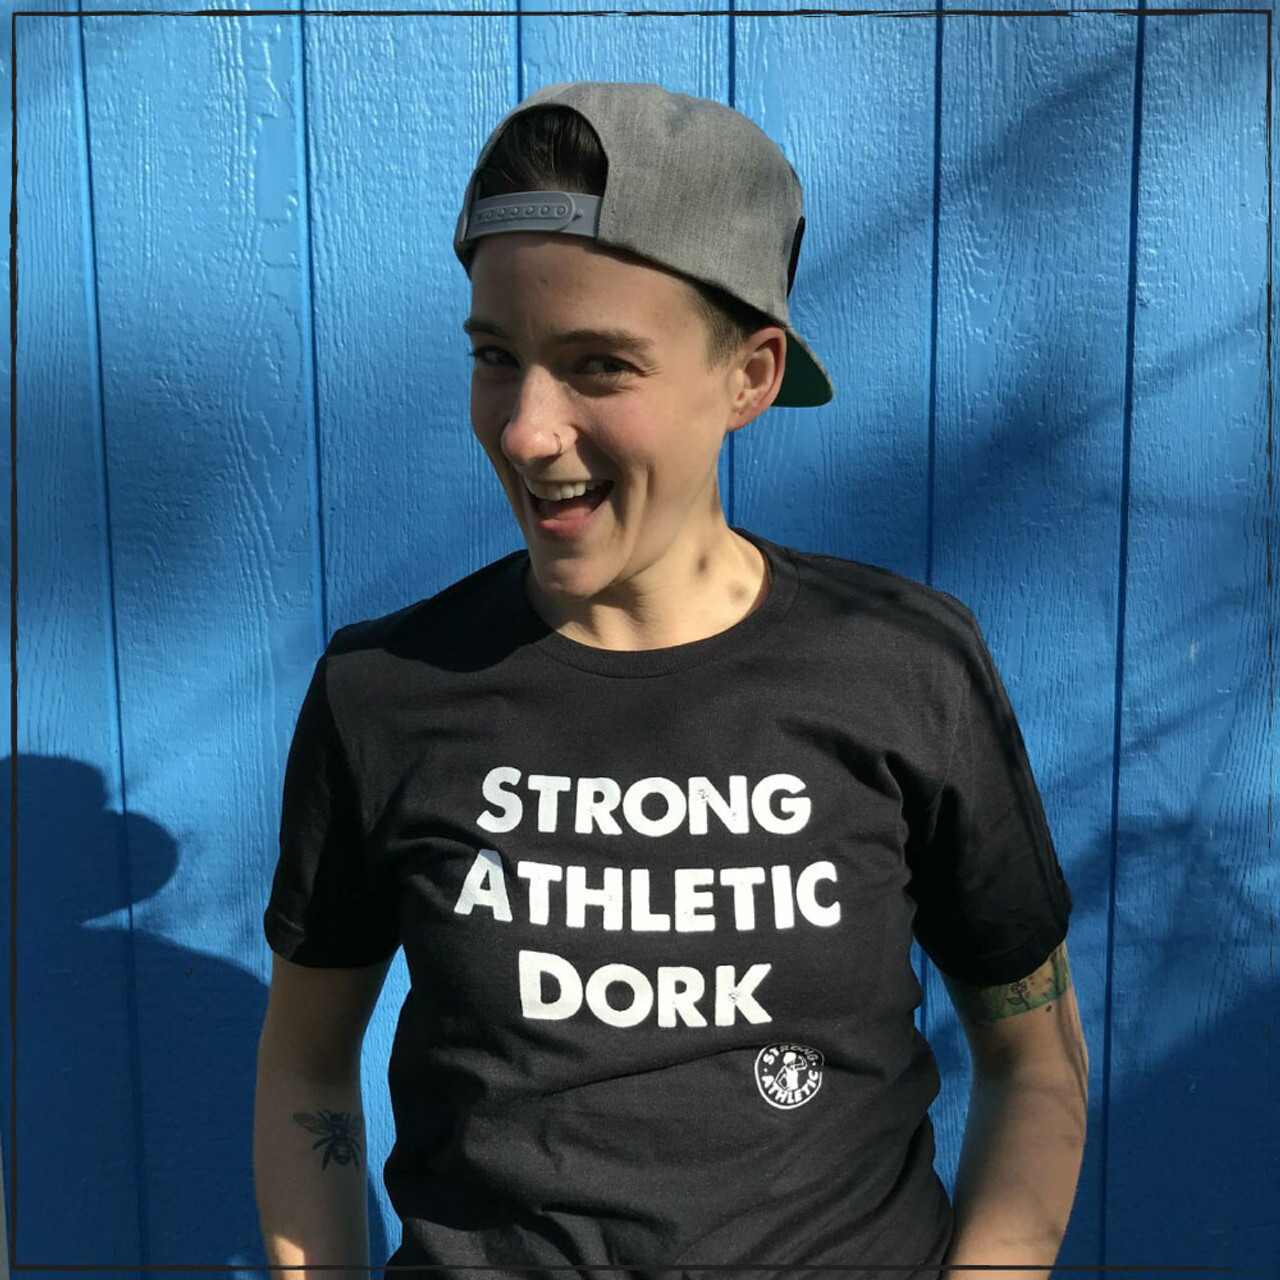 Tees for Dorks: the Strong Athletic Dork Crew Neck T-Shirts are Sold